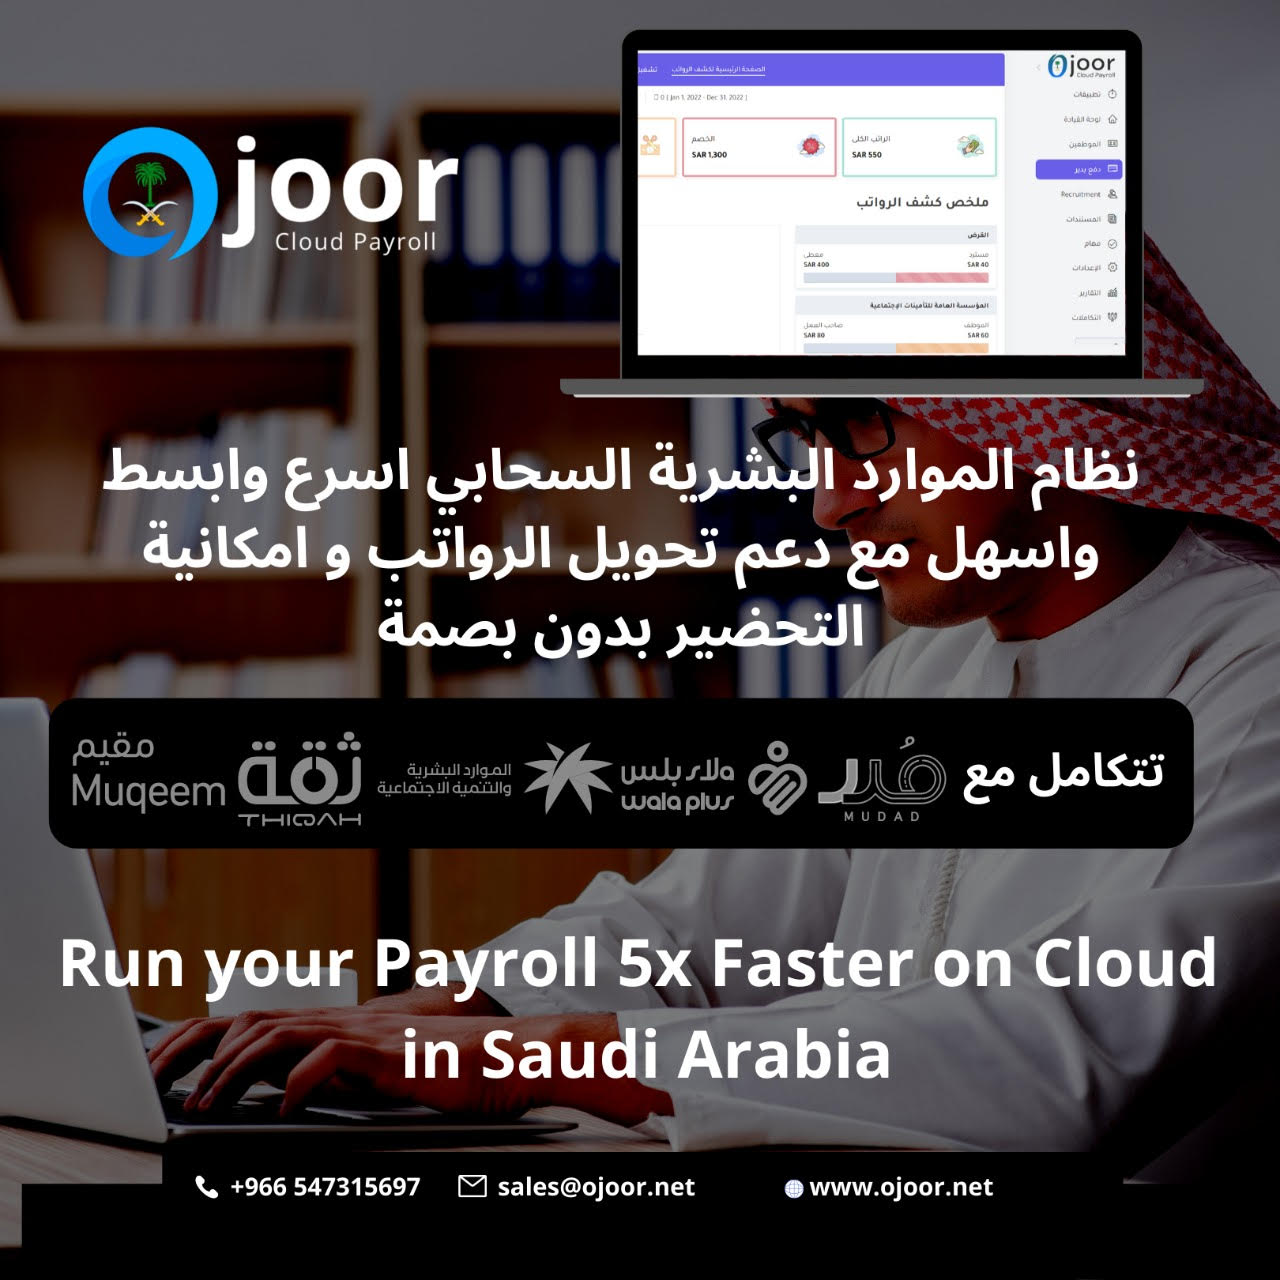 Which are the need of having a Payroll and HR System in Saudi for SMEs?